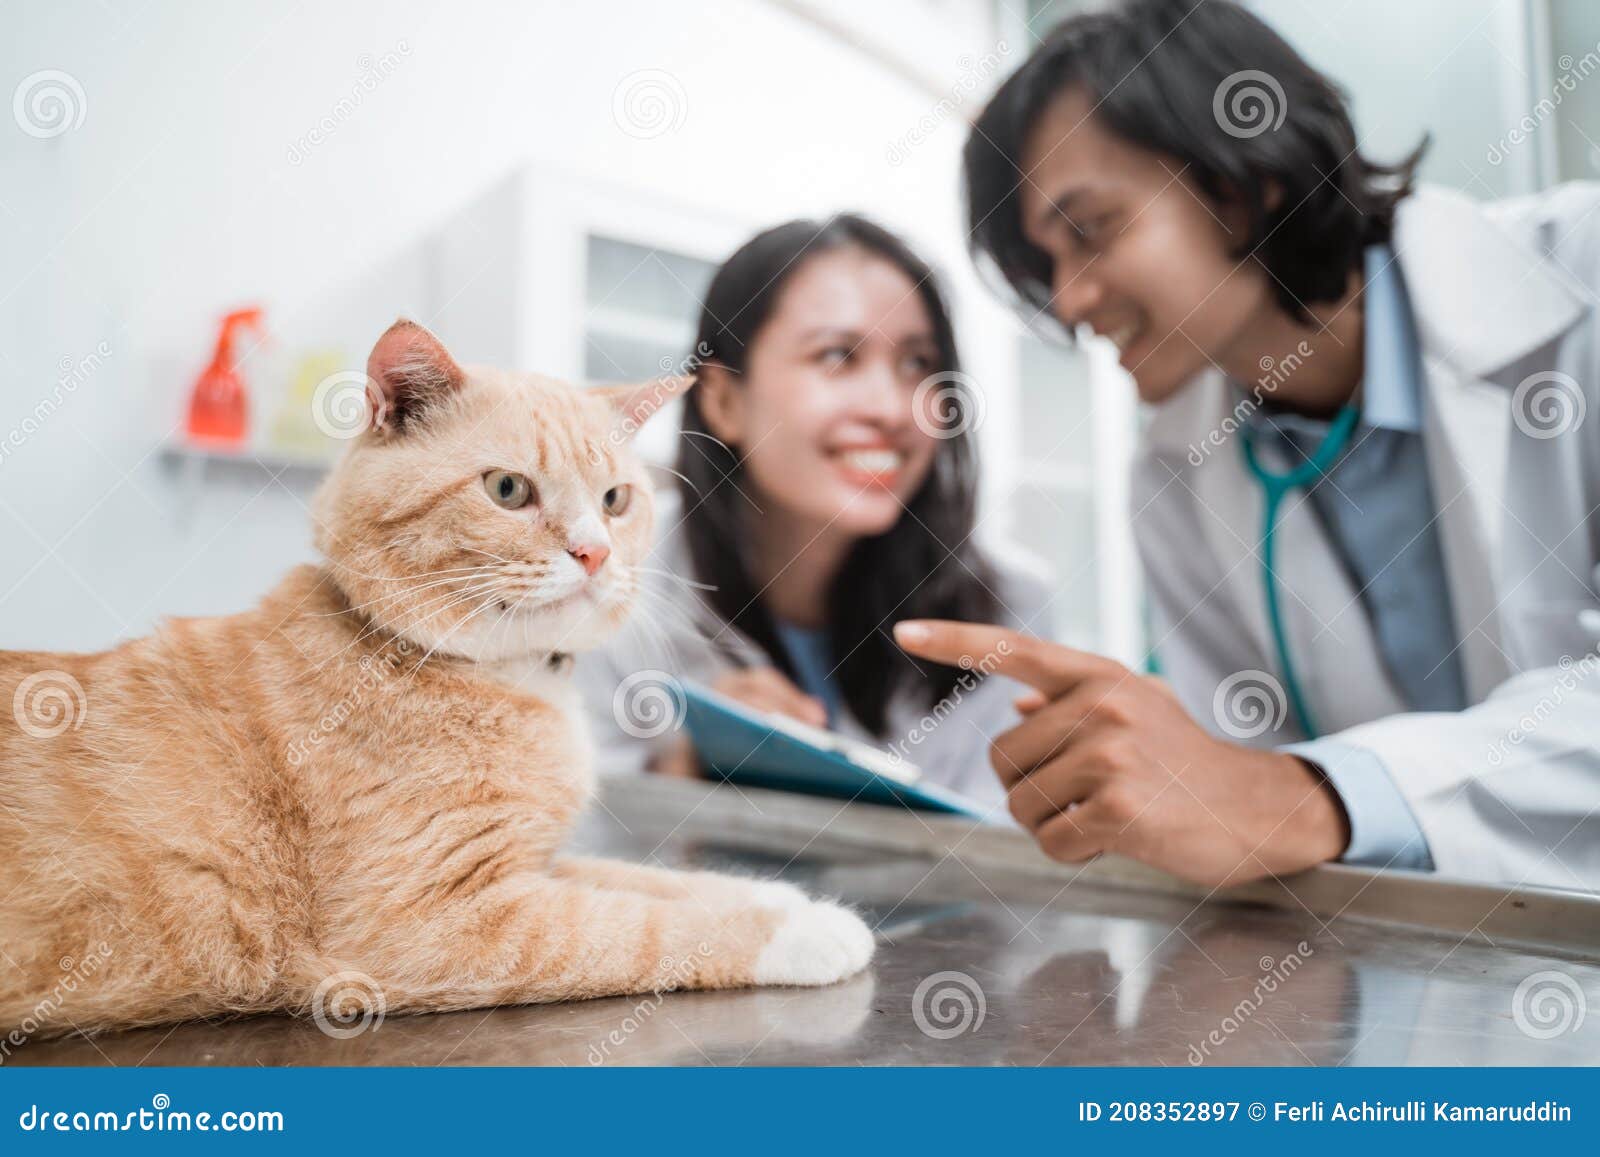 brown cat sits quietly as a couple of vets observe